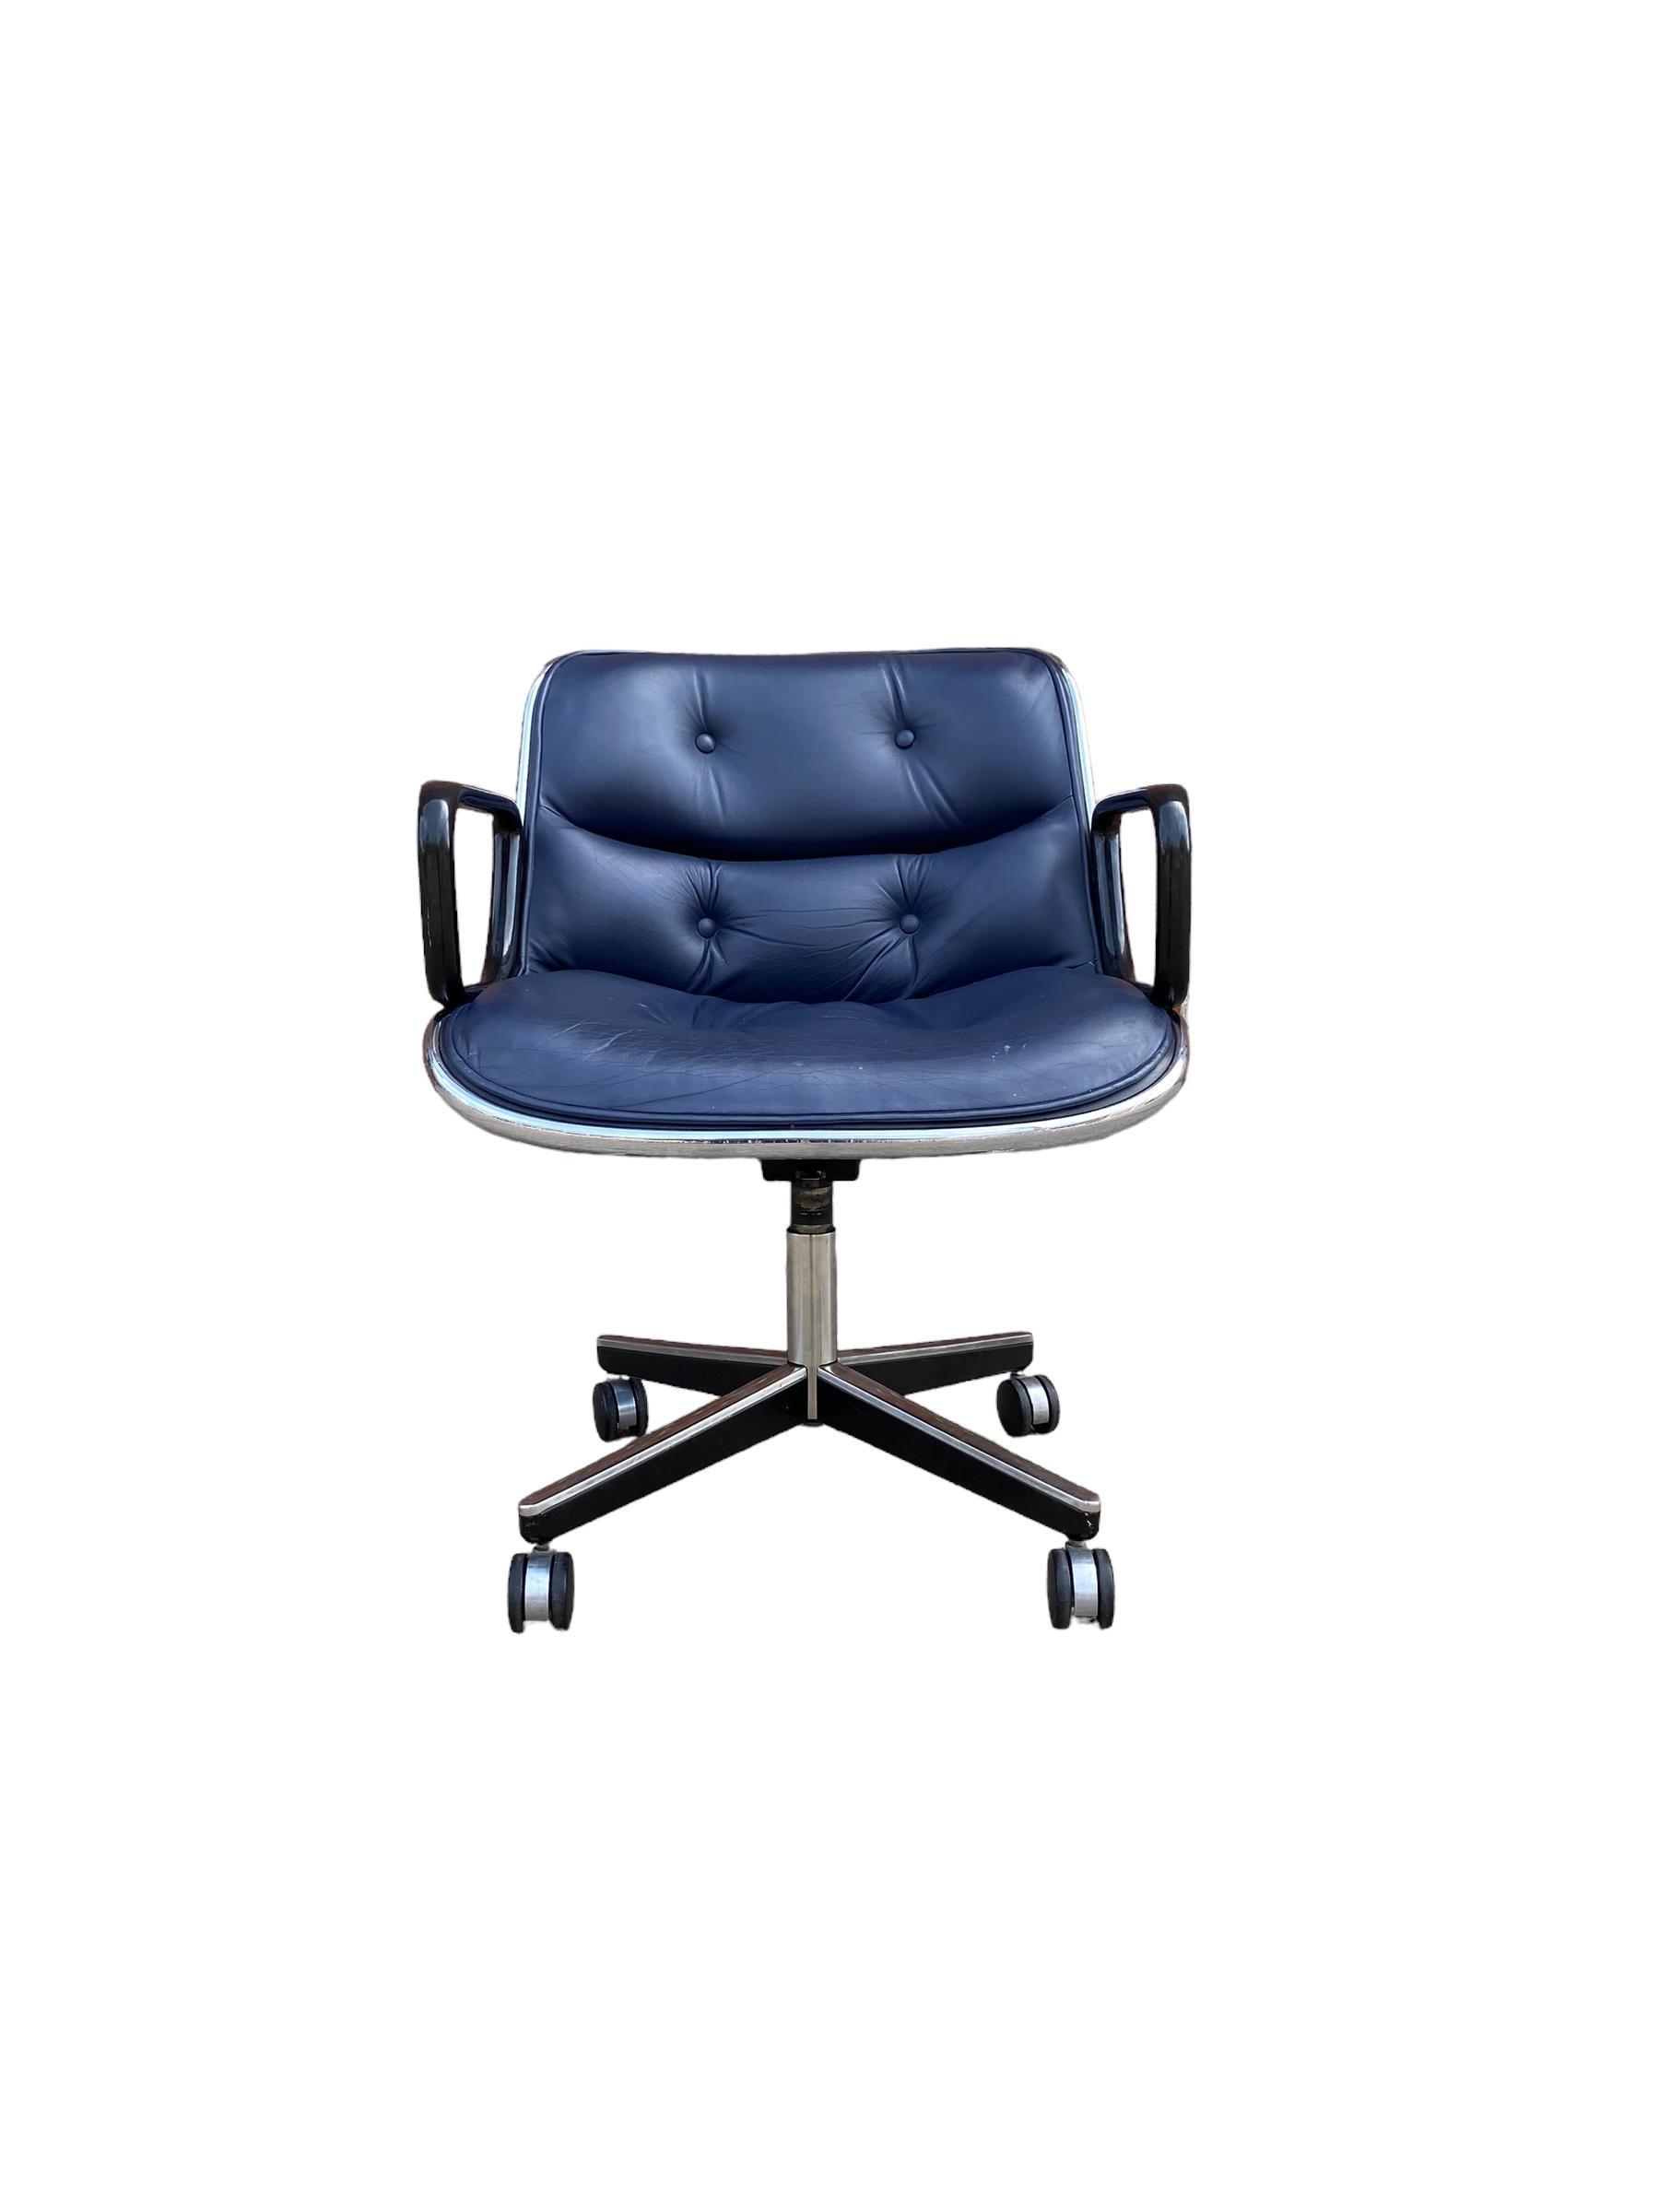 Vintage Charles Pollock for Knoll executive chair in navy blue leather. This executive desk chair has a tilt and swivel base with adjustable height. Base with all wheels in working condition. Good vintage condition, wear consistent with age and use.